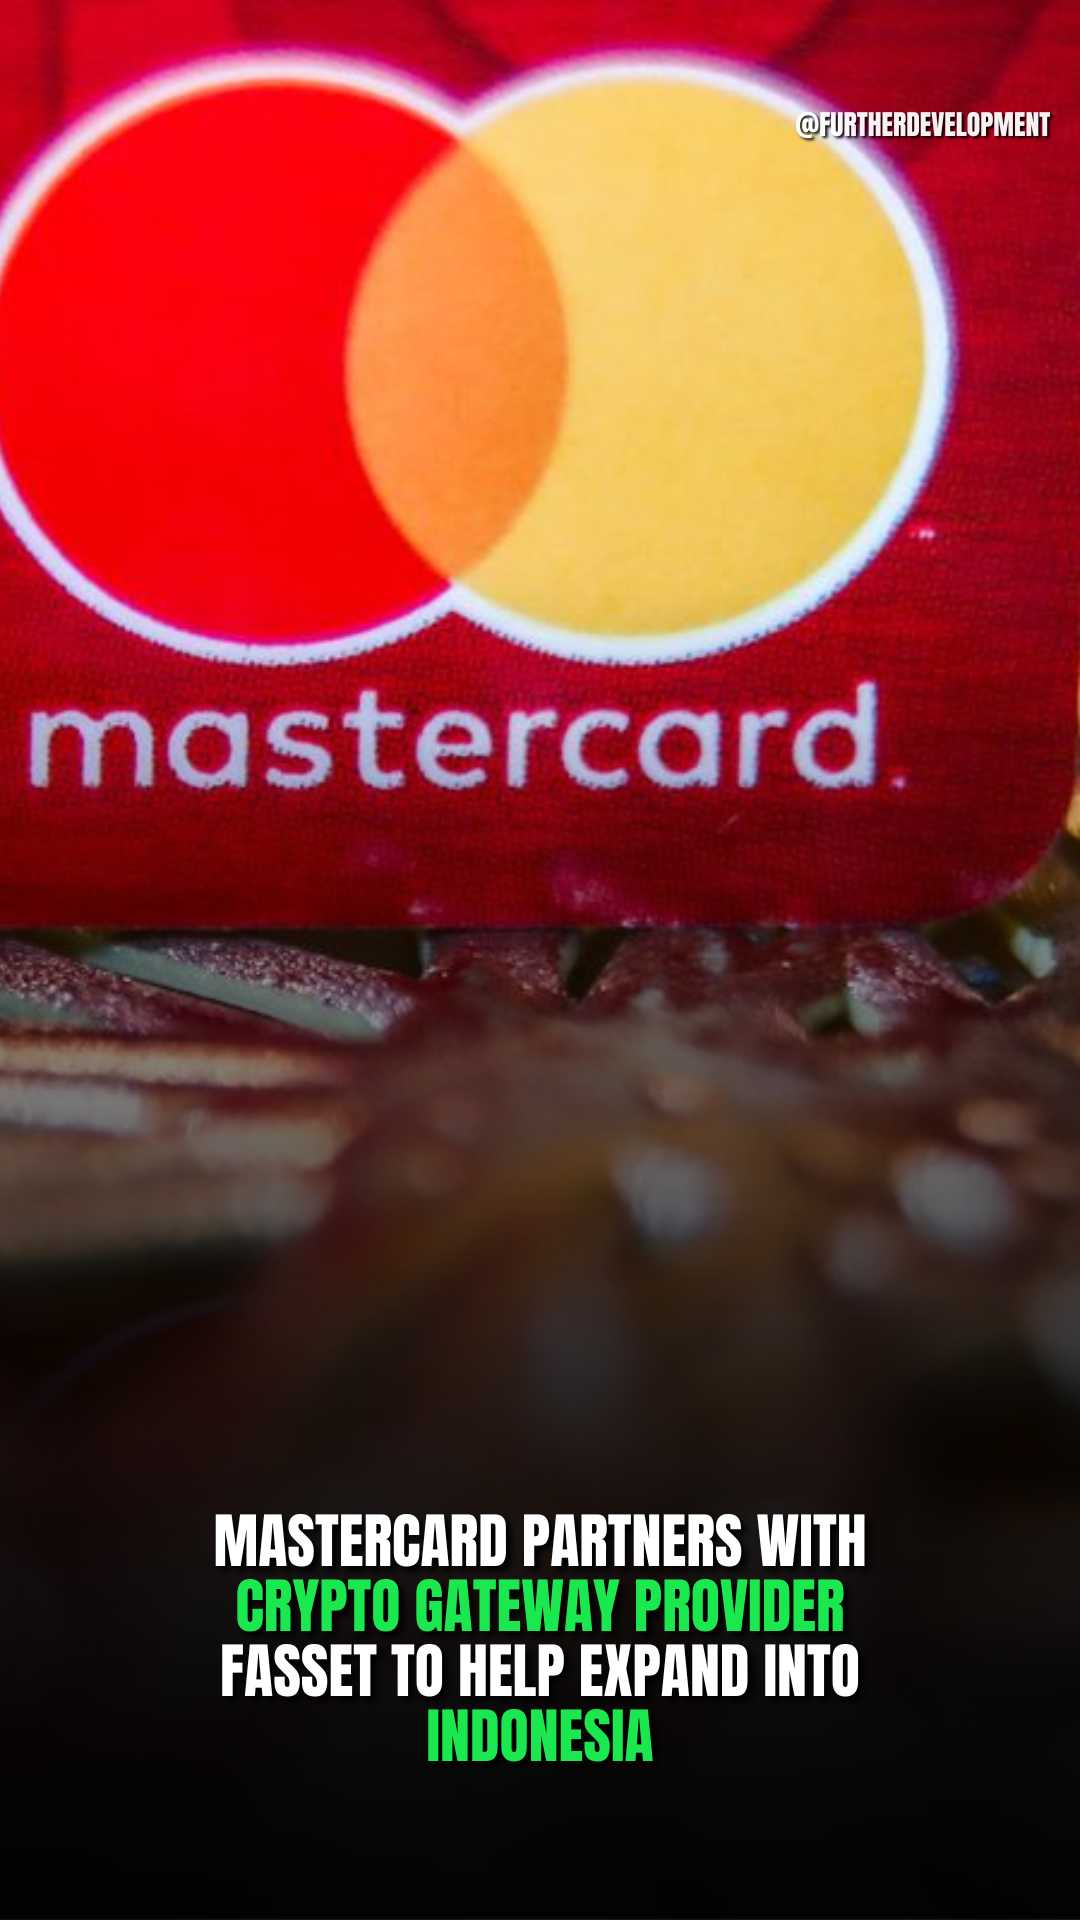 MASTERCARD PARTNERS WITH CRYPTO GATEWAY PROVIDER FASSET TO HELP EXPAND INTO INDONESIA